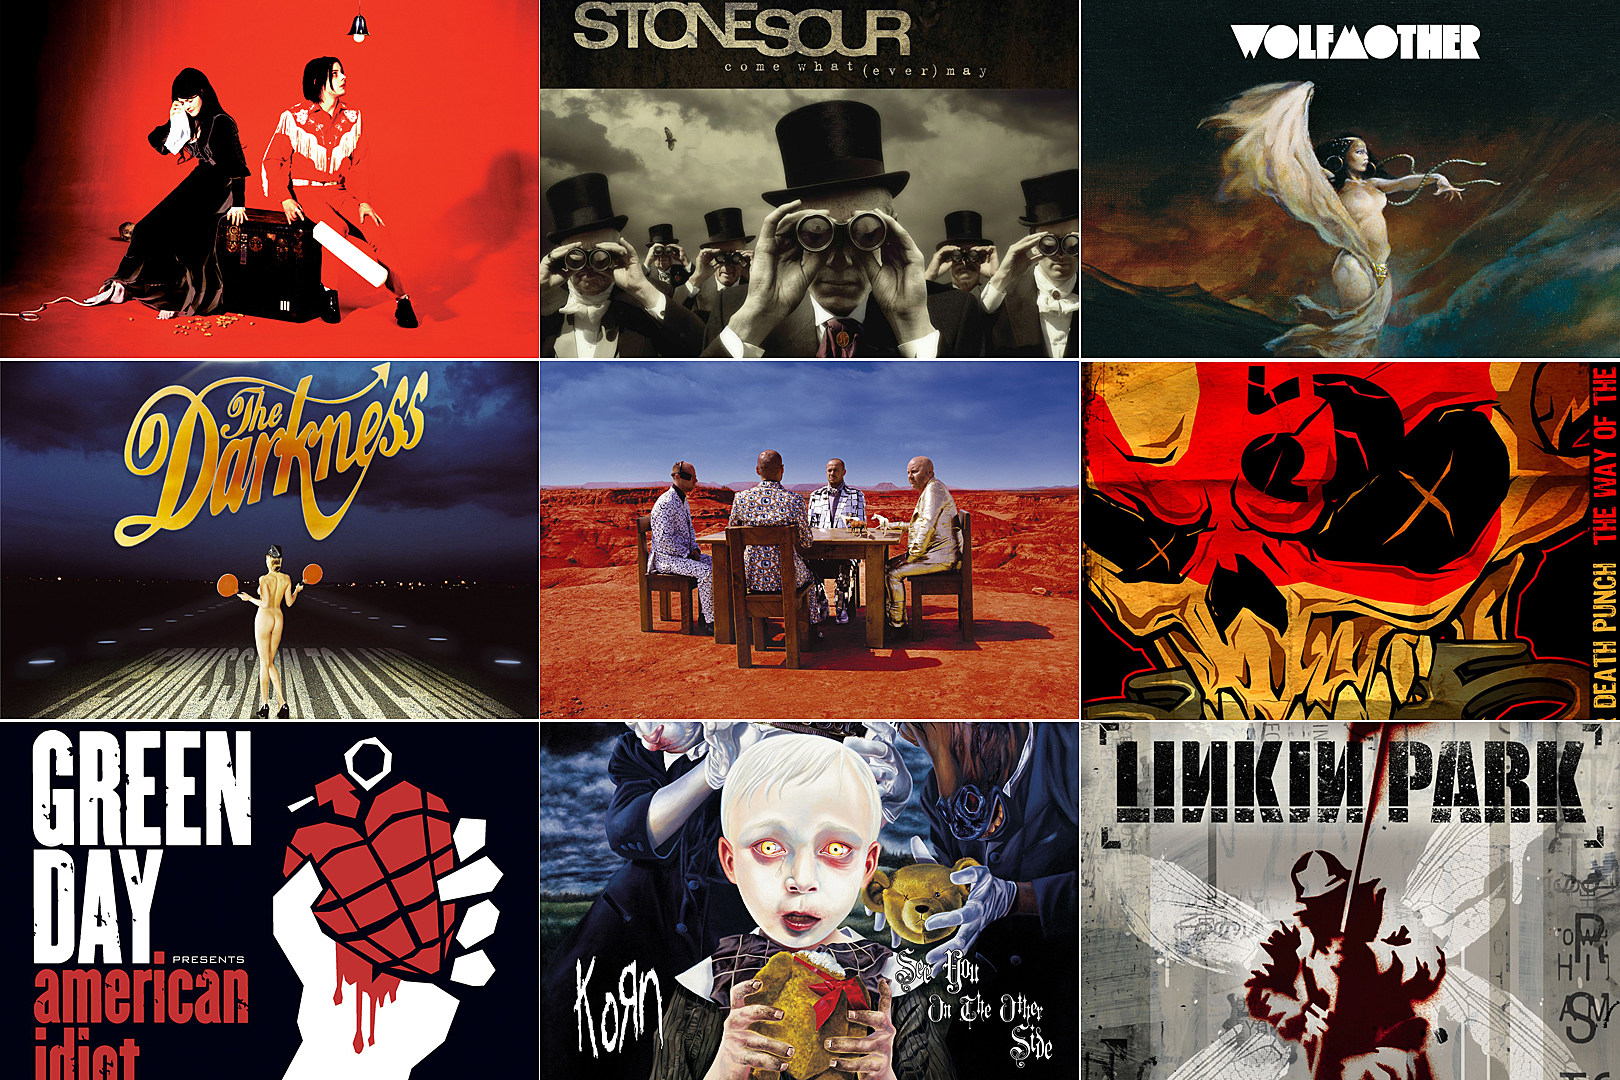 The 66 Best Rock Songs of the 2000s - 2000-2009